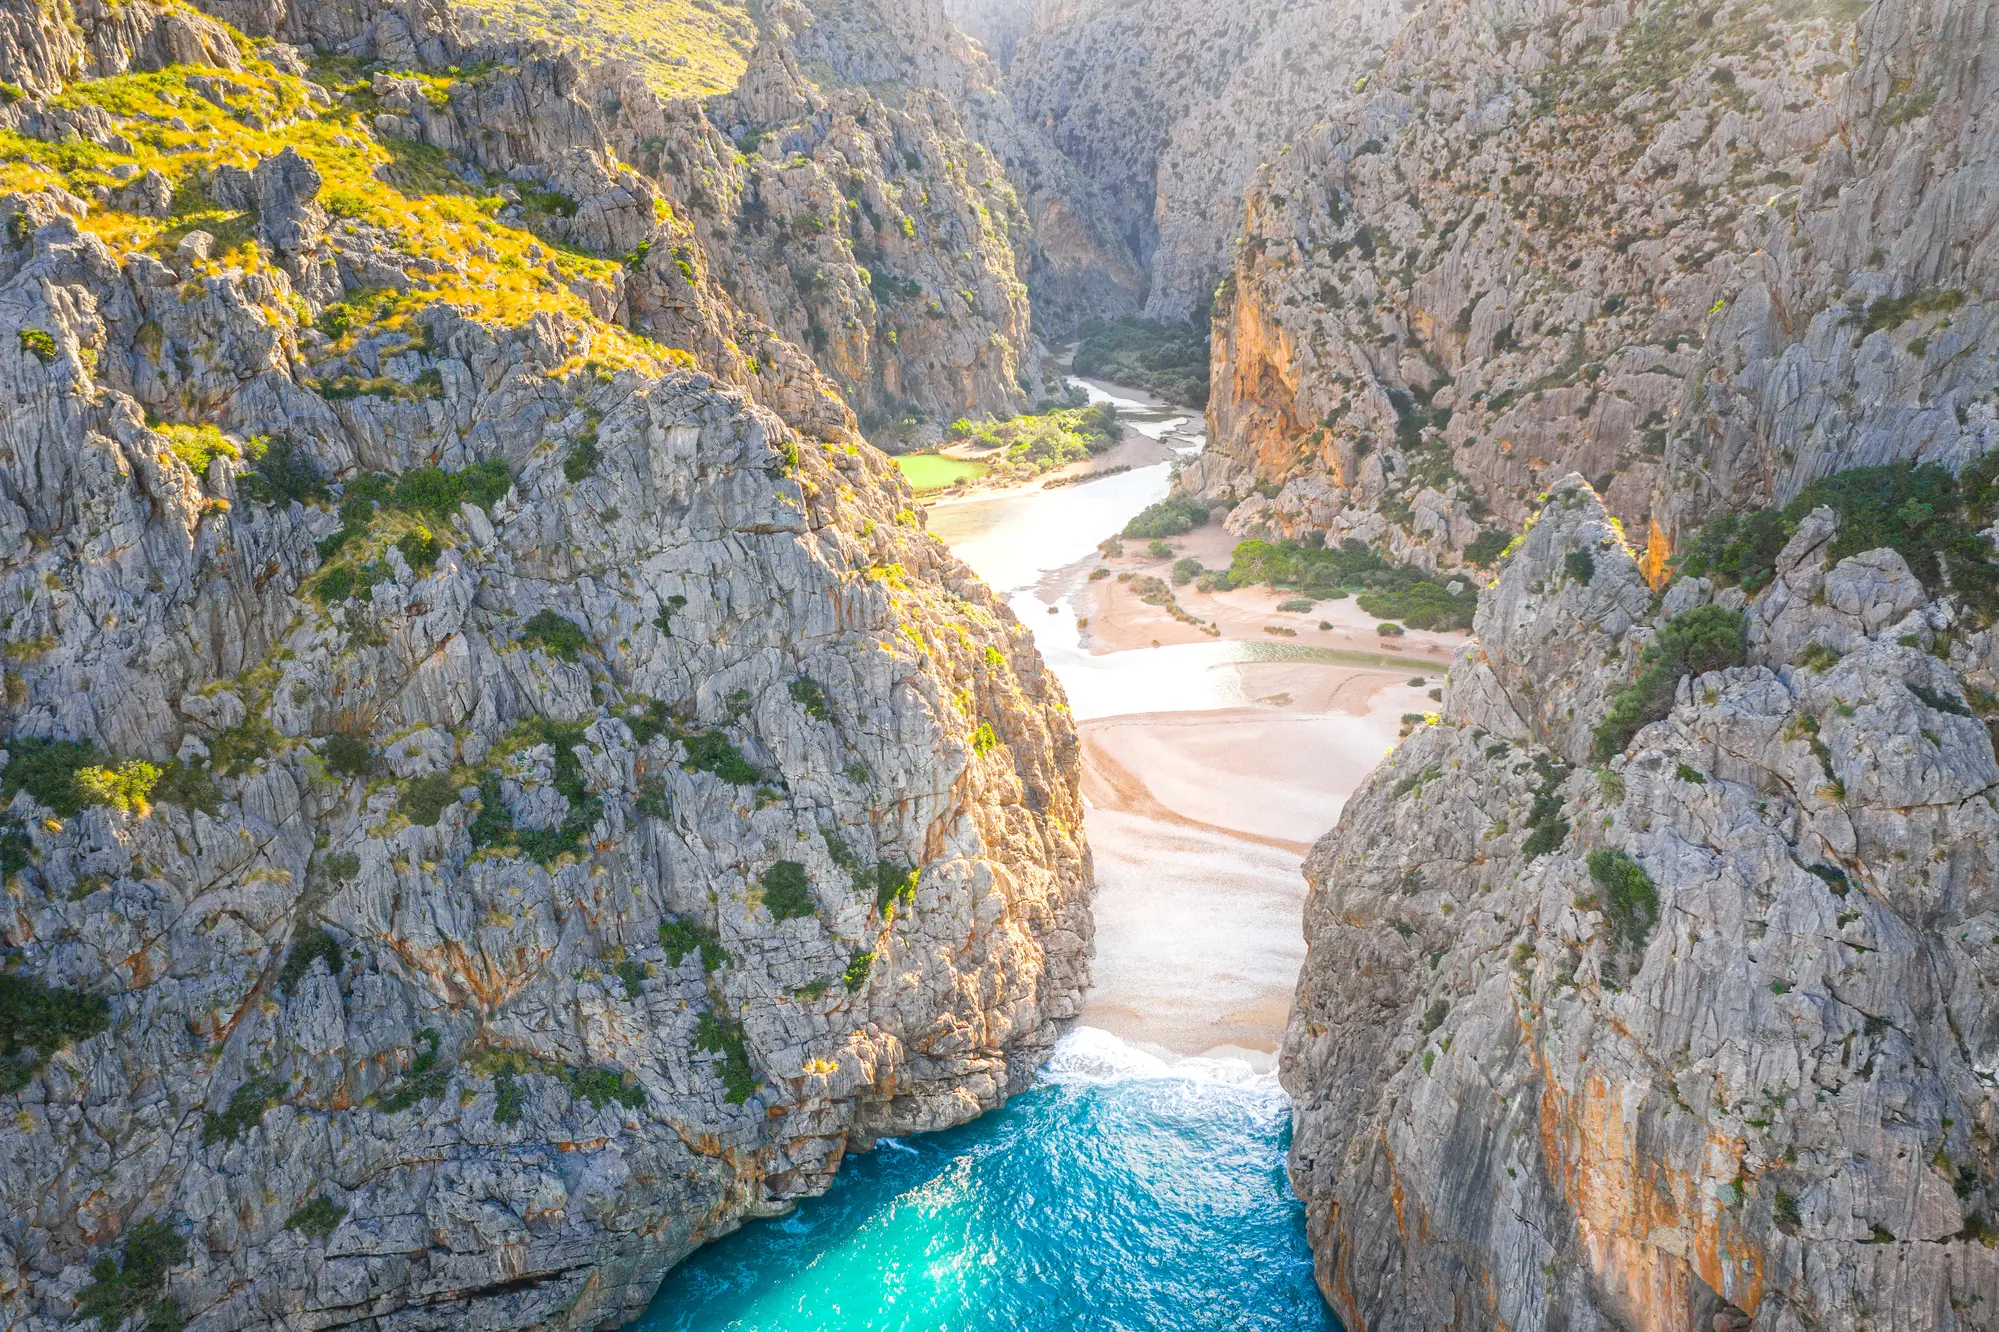 View from above of Torrente de Pareis in Mallorca, a large gorge with a pebbled beach and turquoise water.